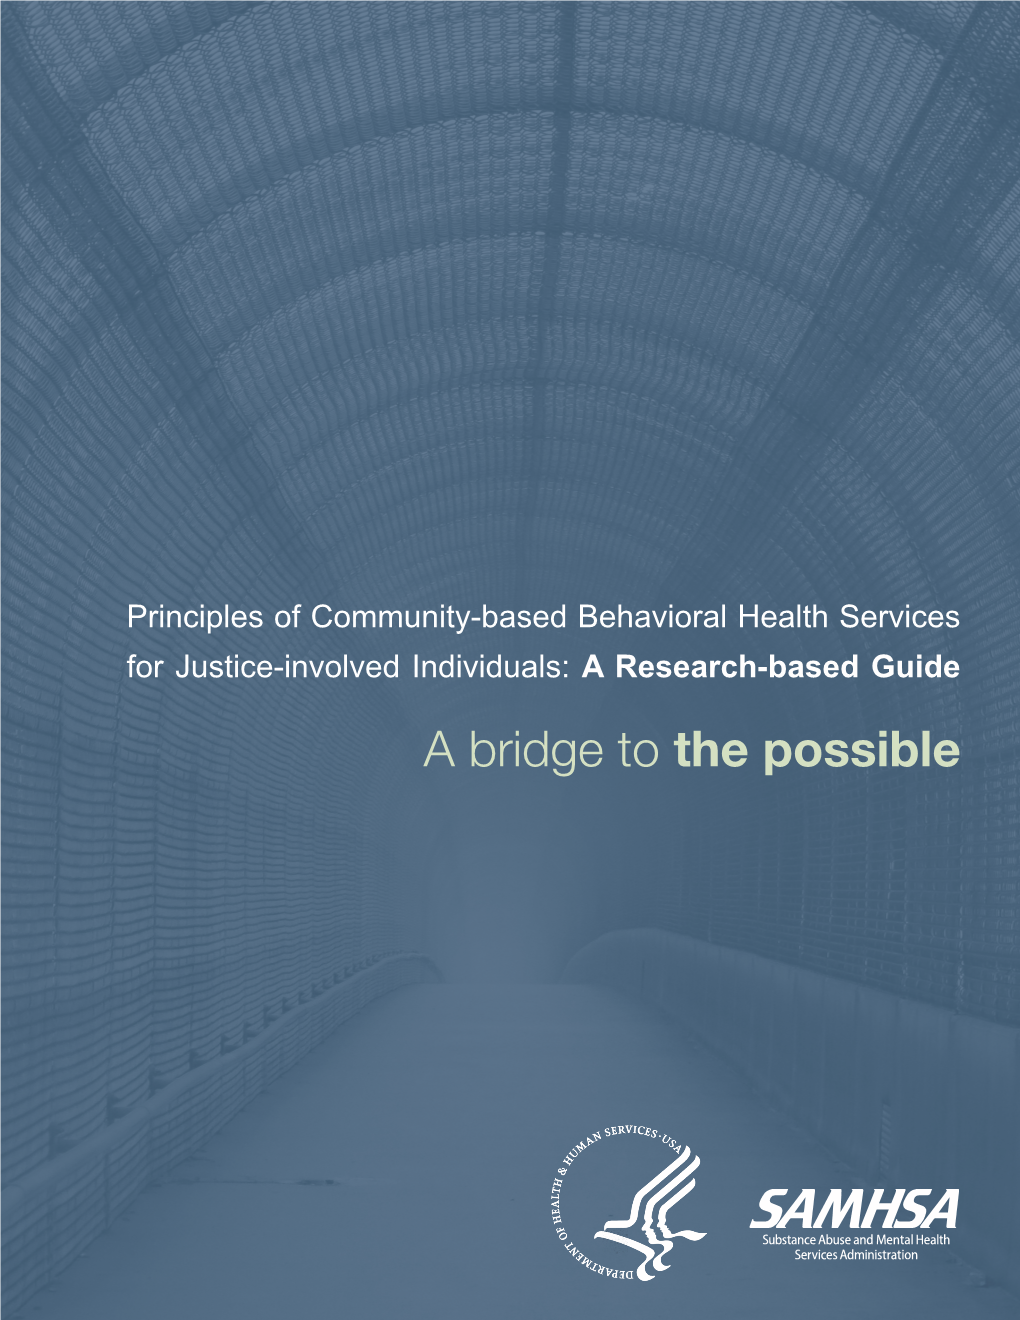 Principles of Community-Based Behavioral Health Services for Justice-Involved Individuals: a Research-Based Guide a Bridge to the Possible